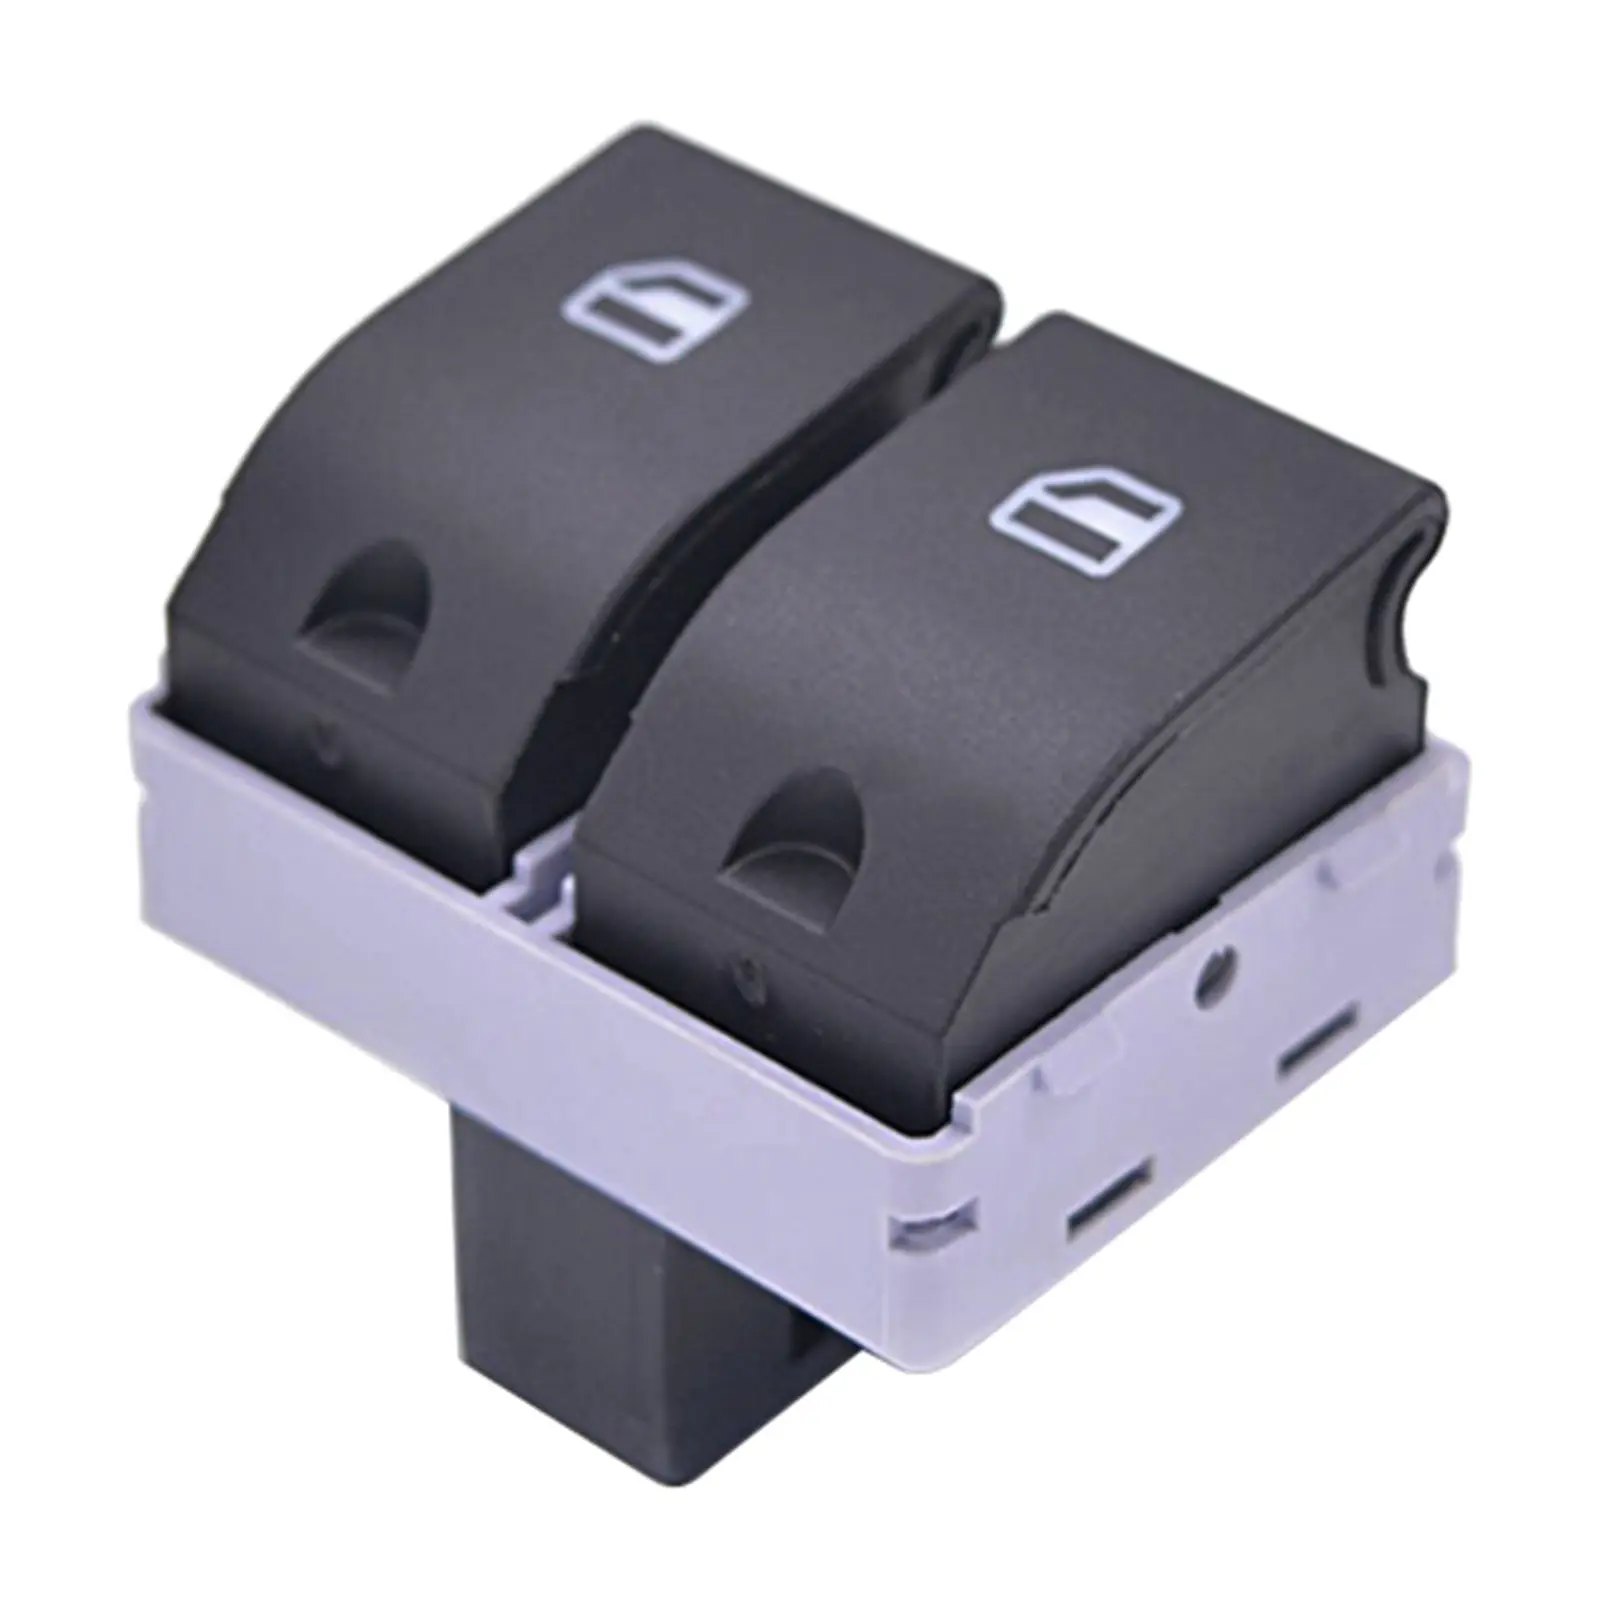 Driver`s Door Electric Window Control Switch Fit for VW Fox 6Q0 959 858 2002-2010